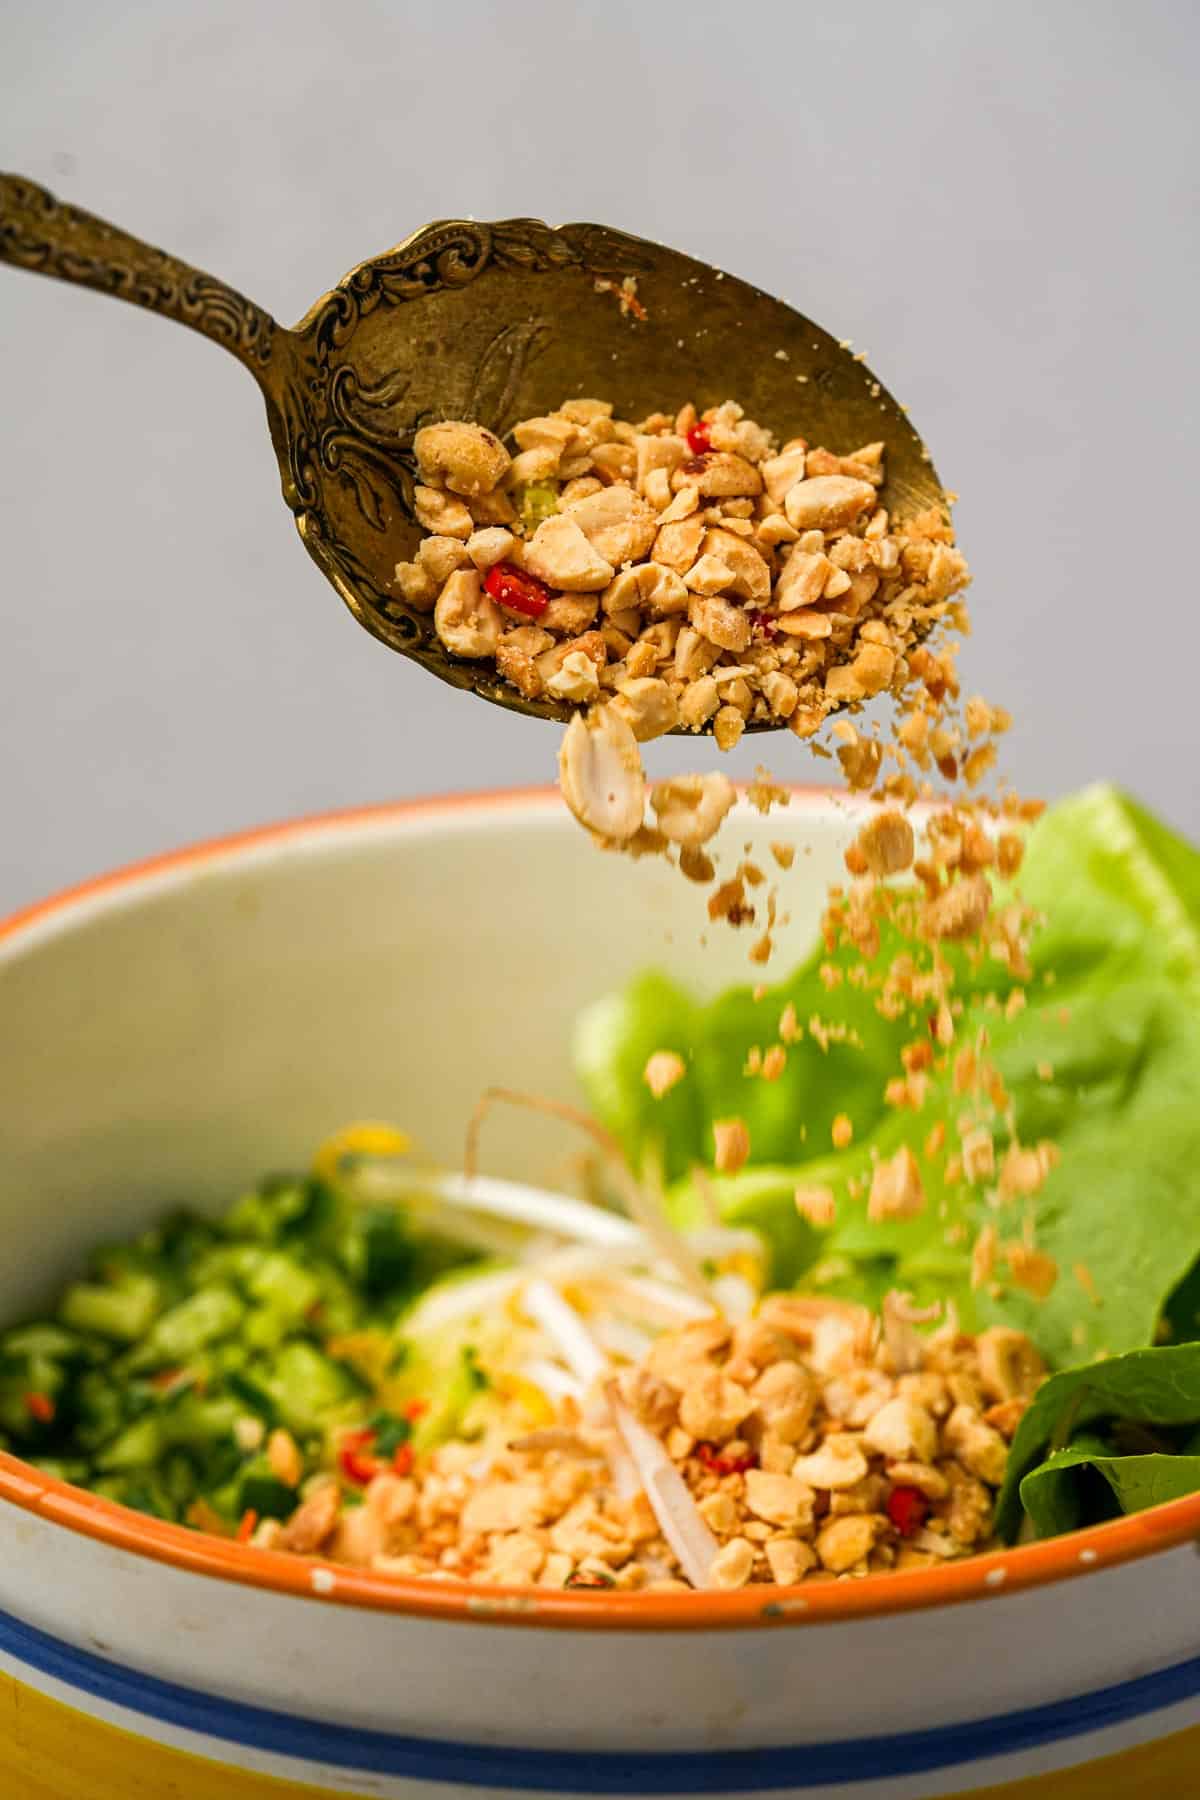 A spoon is sprinkling crushed peanuts on a bowl of salad.